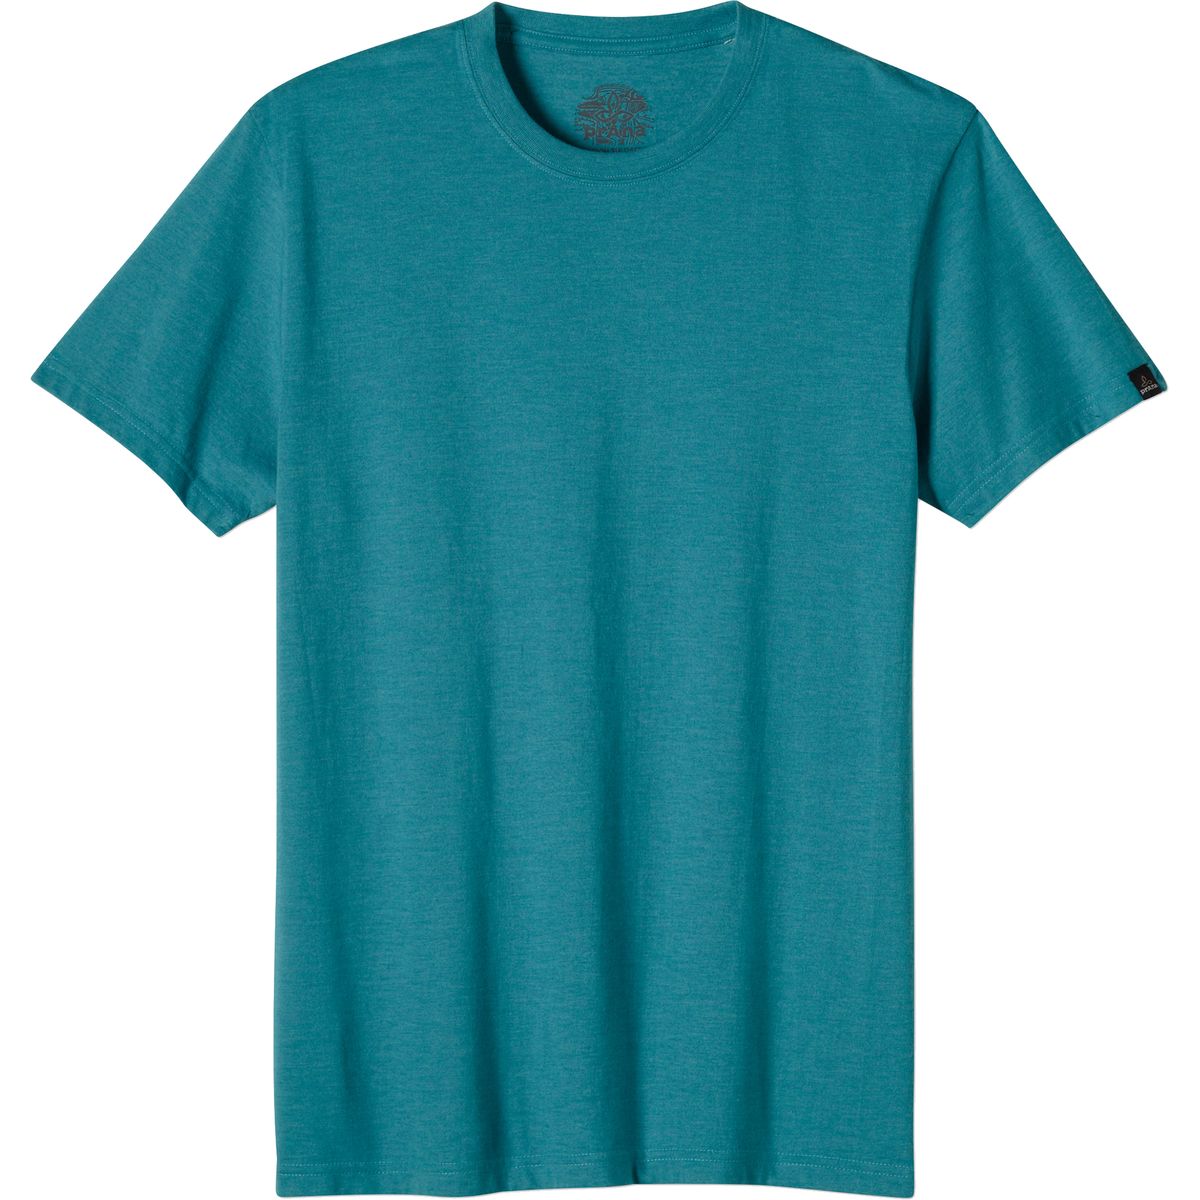 Prana - Men's Classic Casual Styles. Sustainable fashion and apparel.